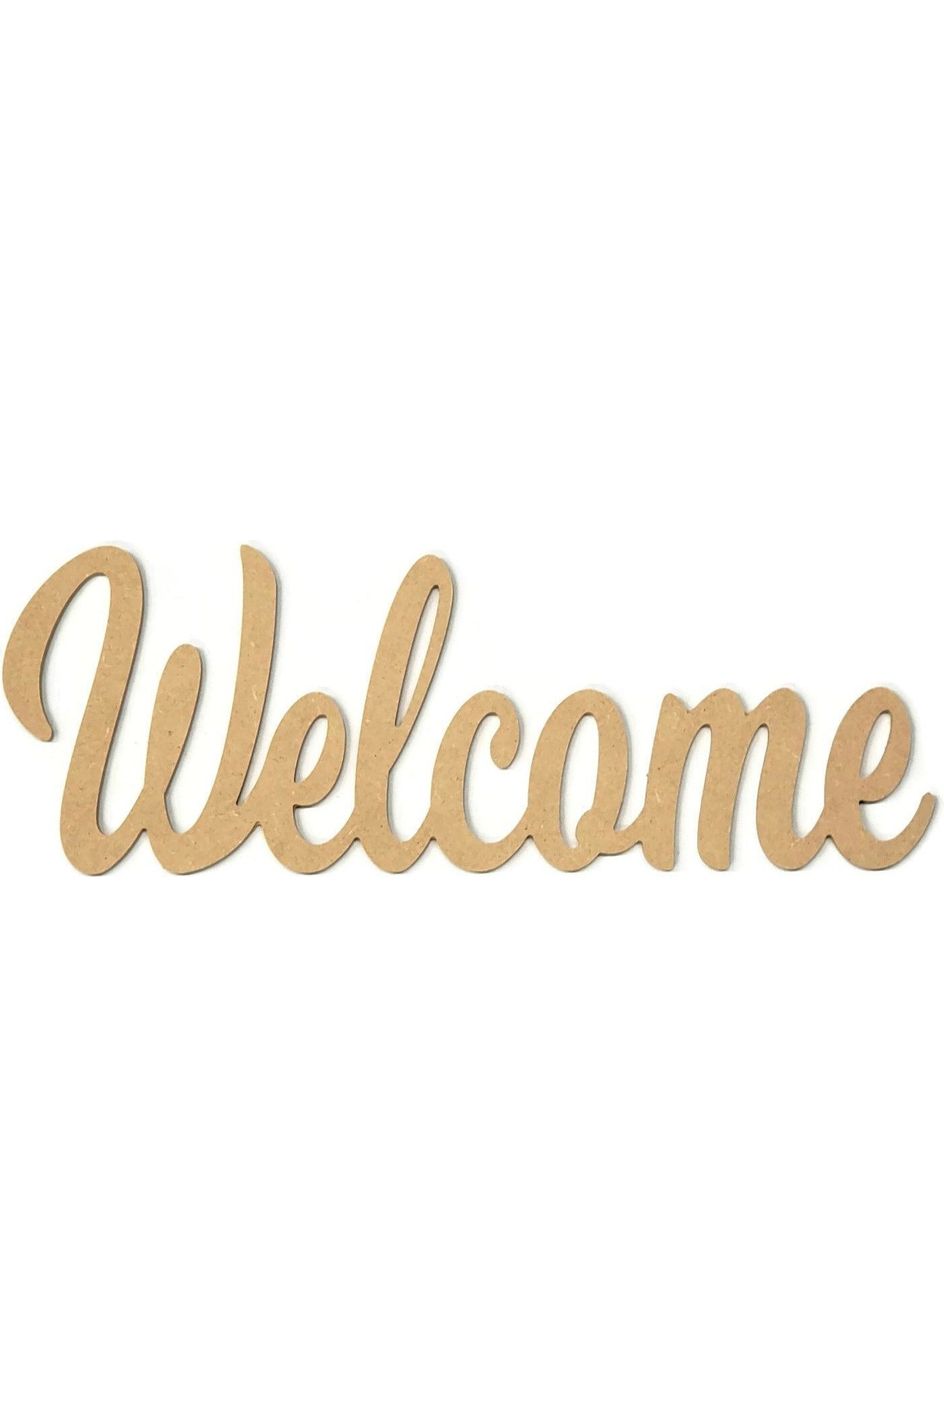 Shop For 14" Unpainted MDF Wood Welcome Cutout